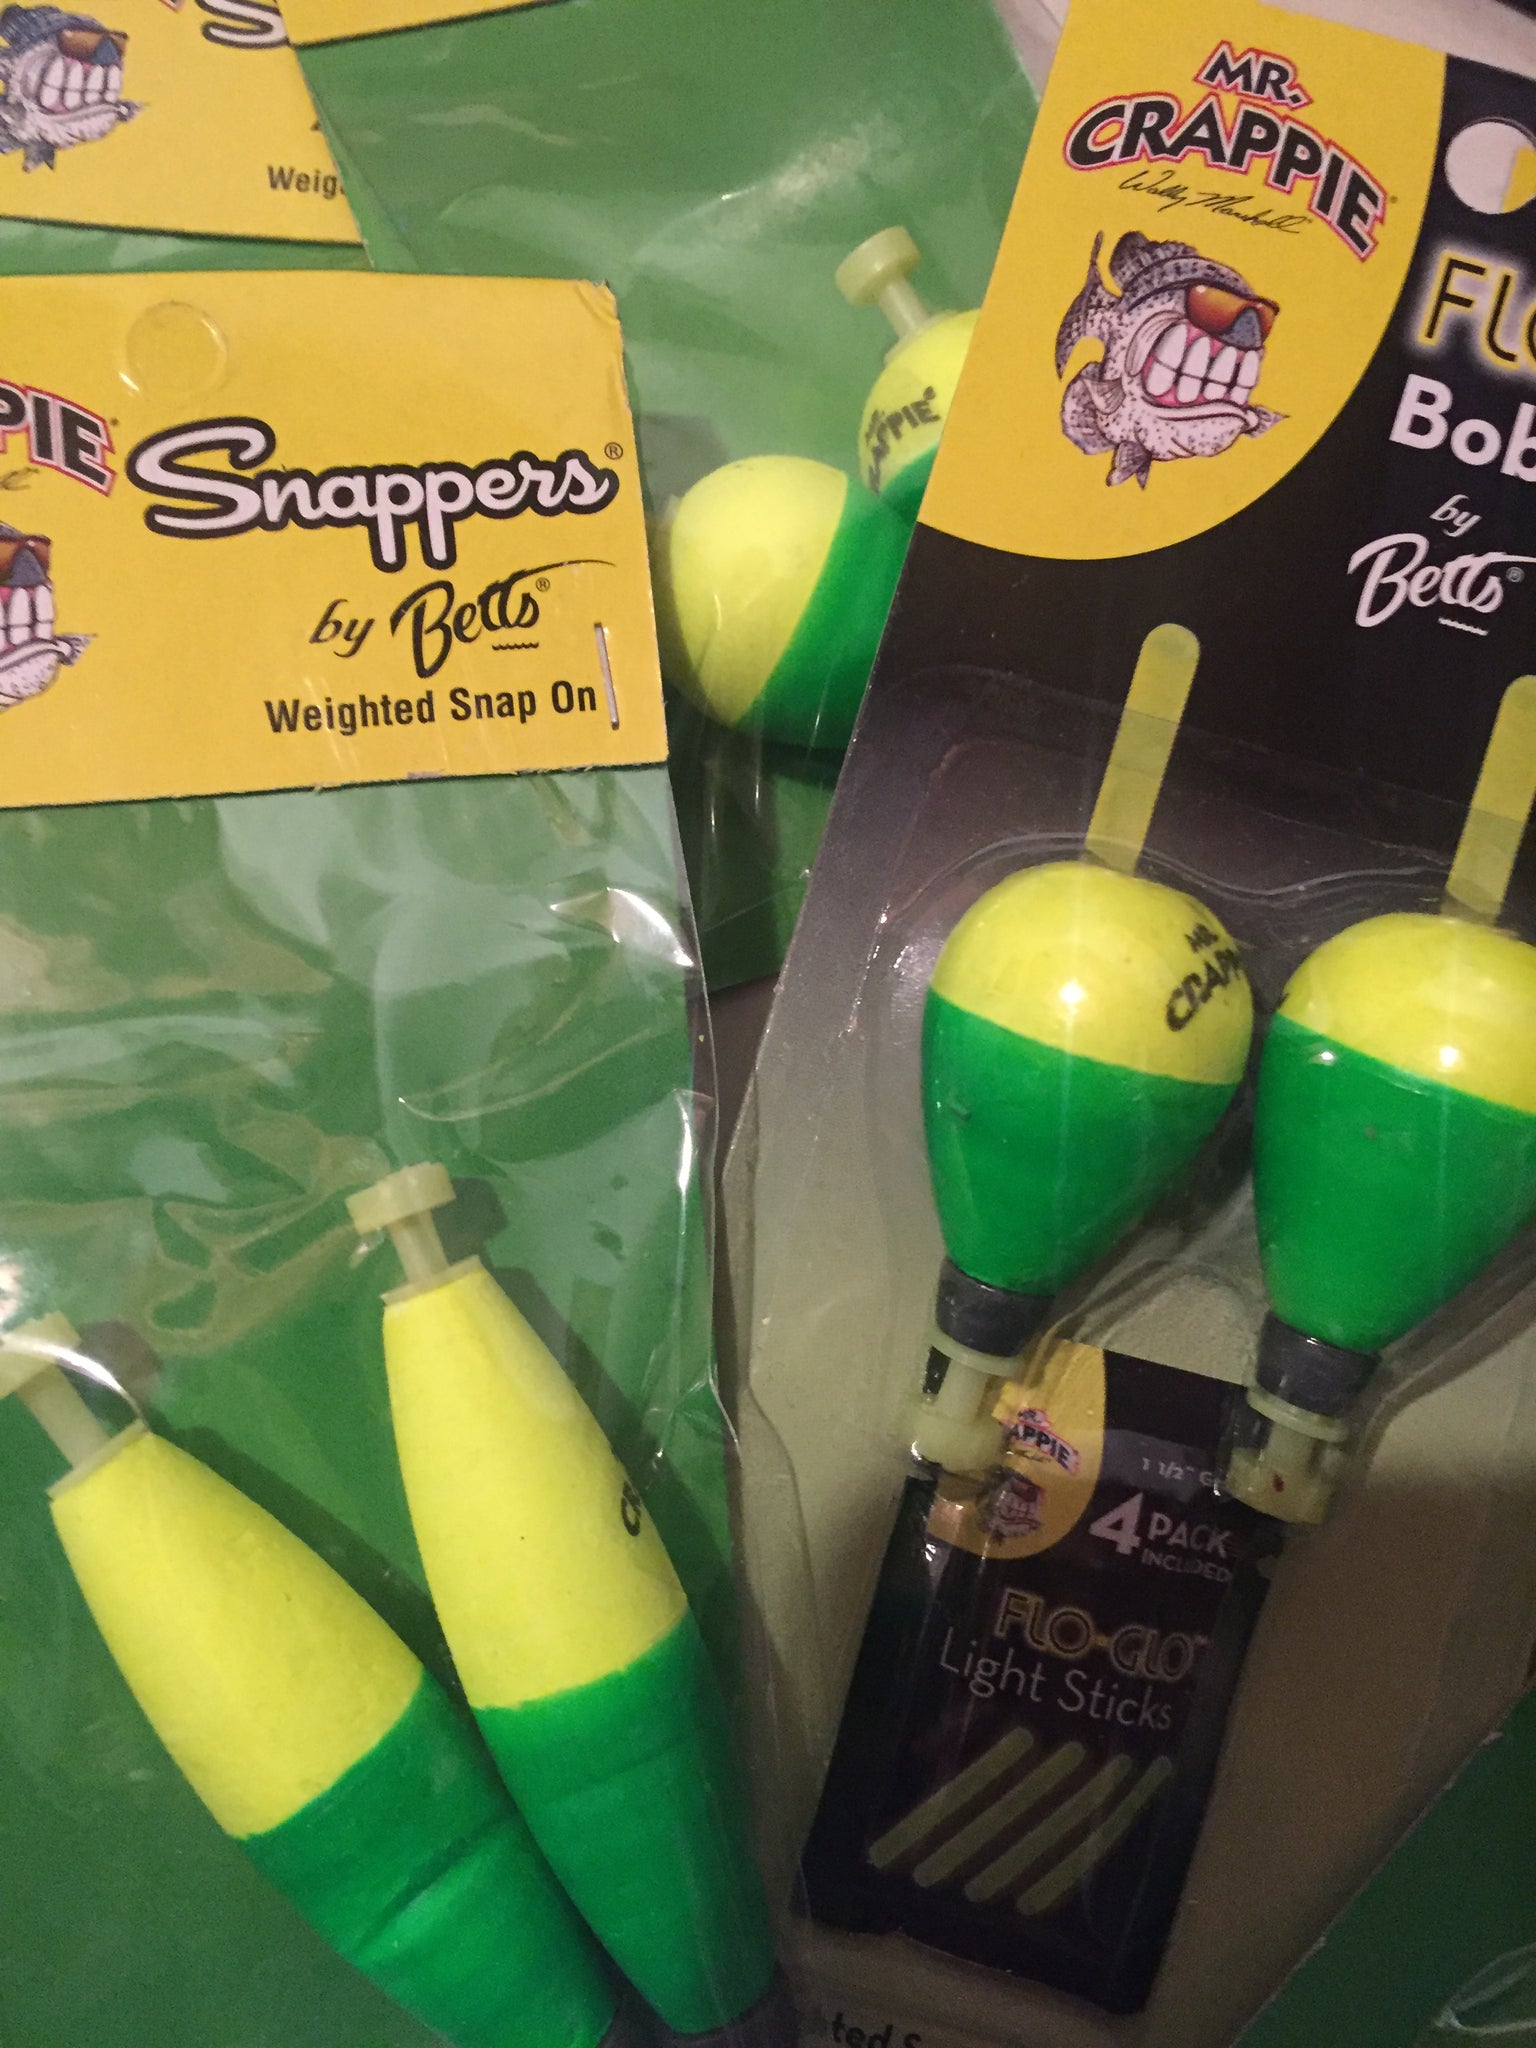 Betts Mr Crappie Wgt Snap On Fishing Equipment, 1 1/4 oz, Corks, Floats &  Bobbers -  Canada